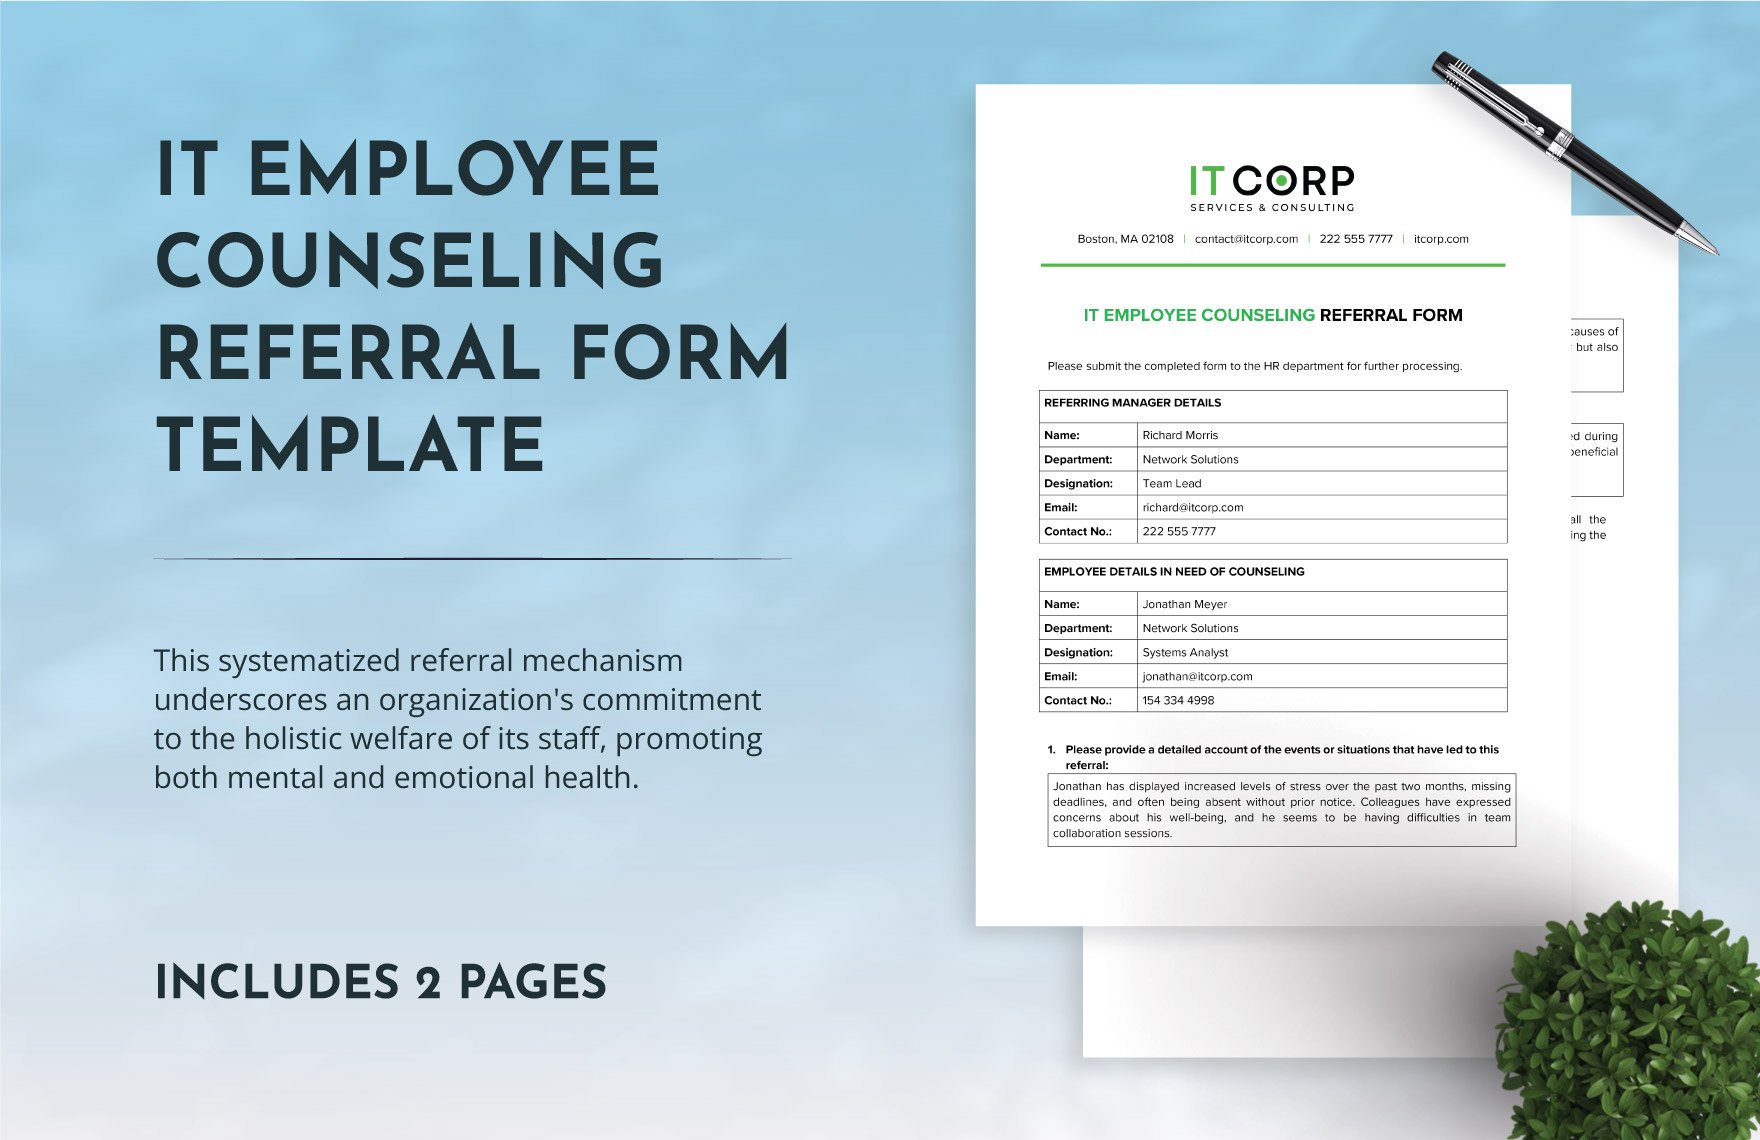 IT Employee Counseling Referral Form Template